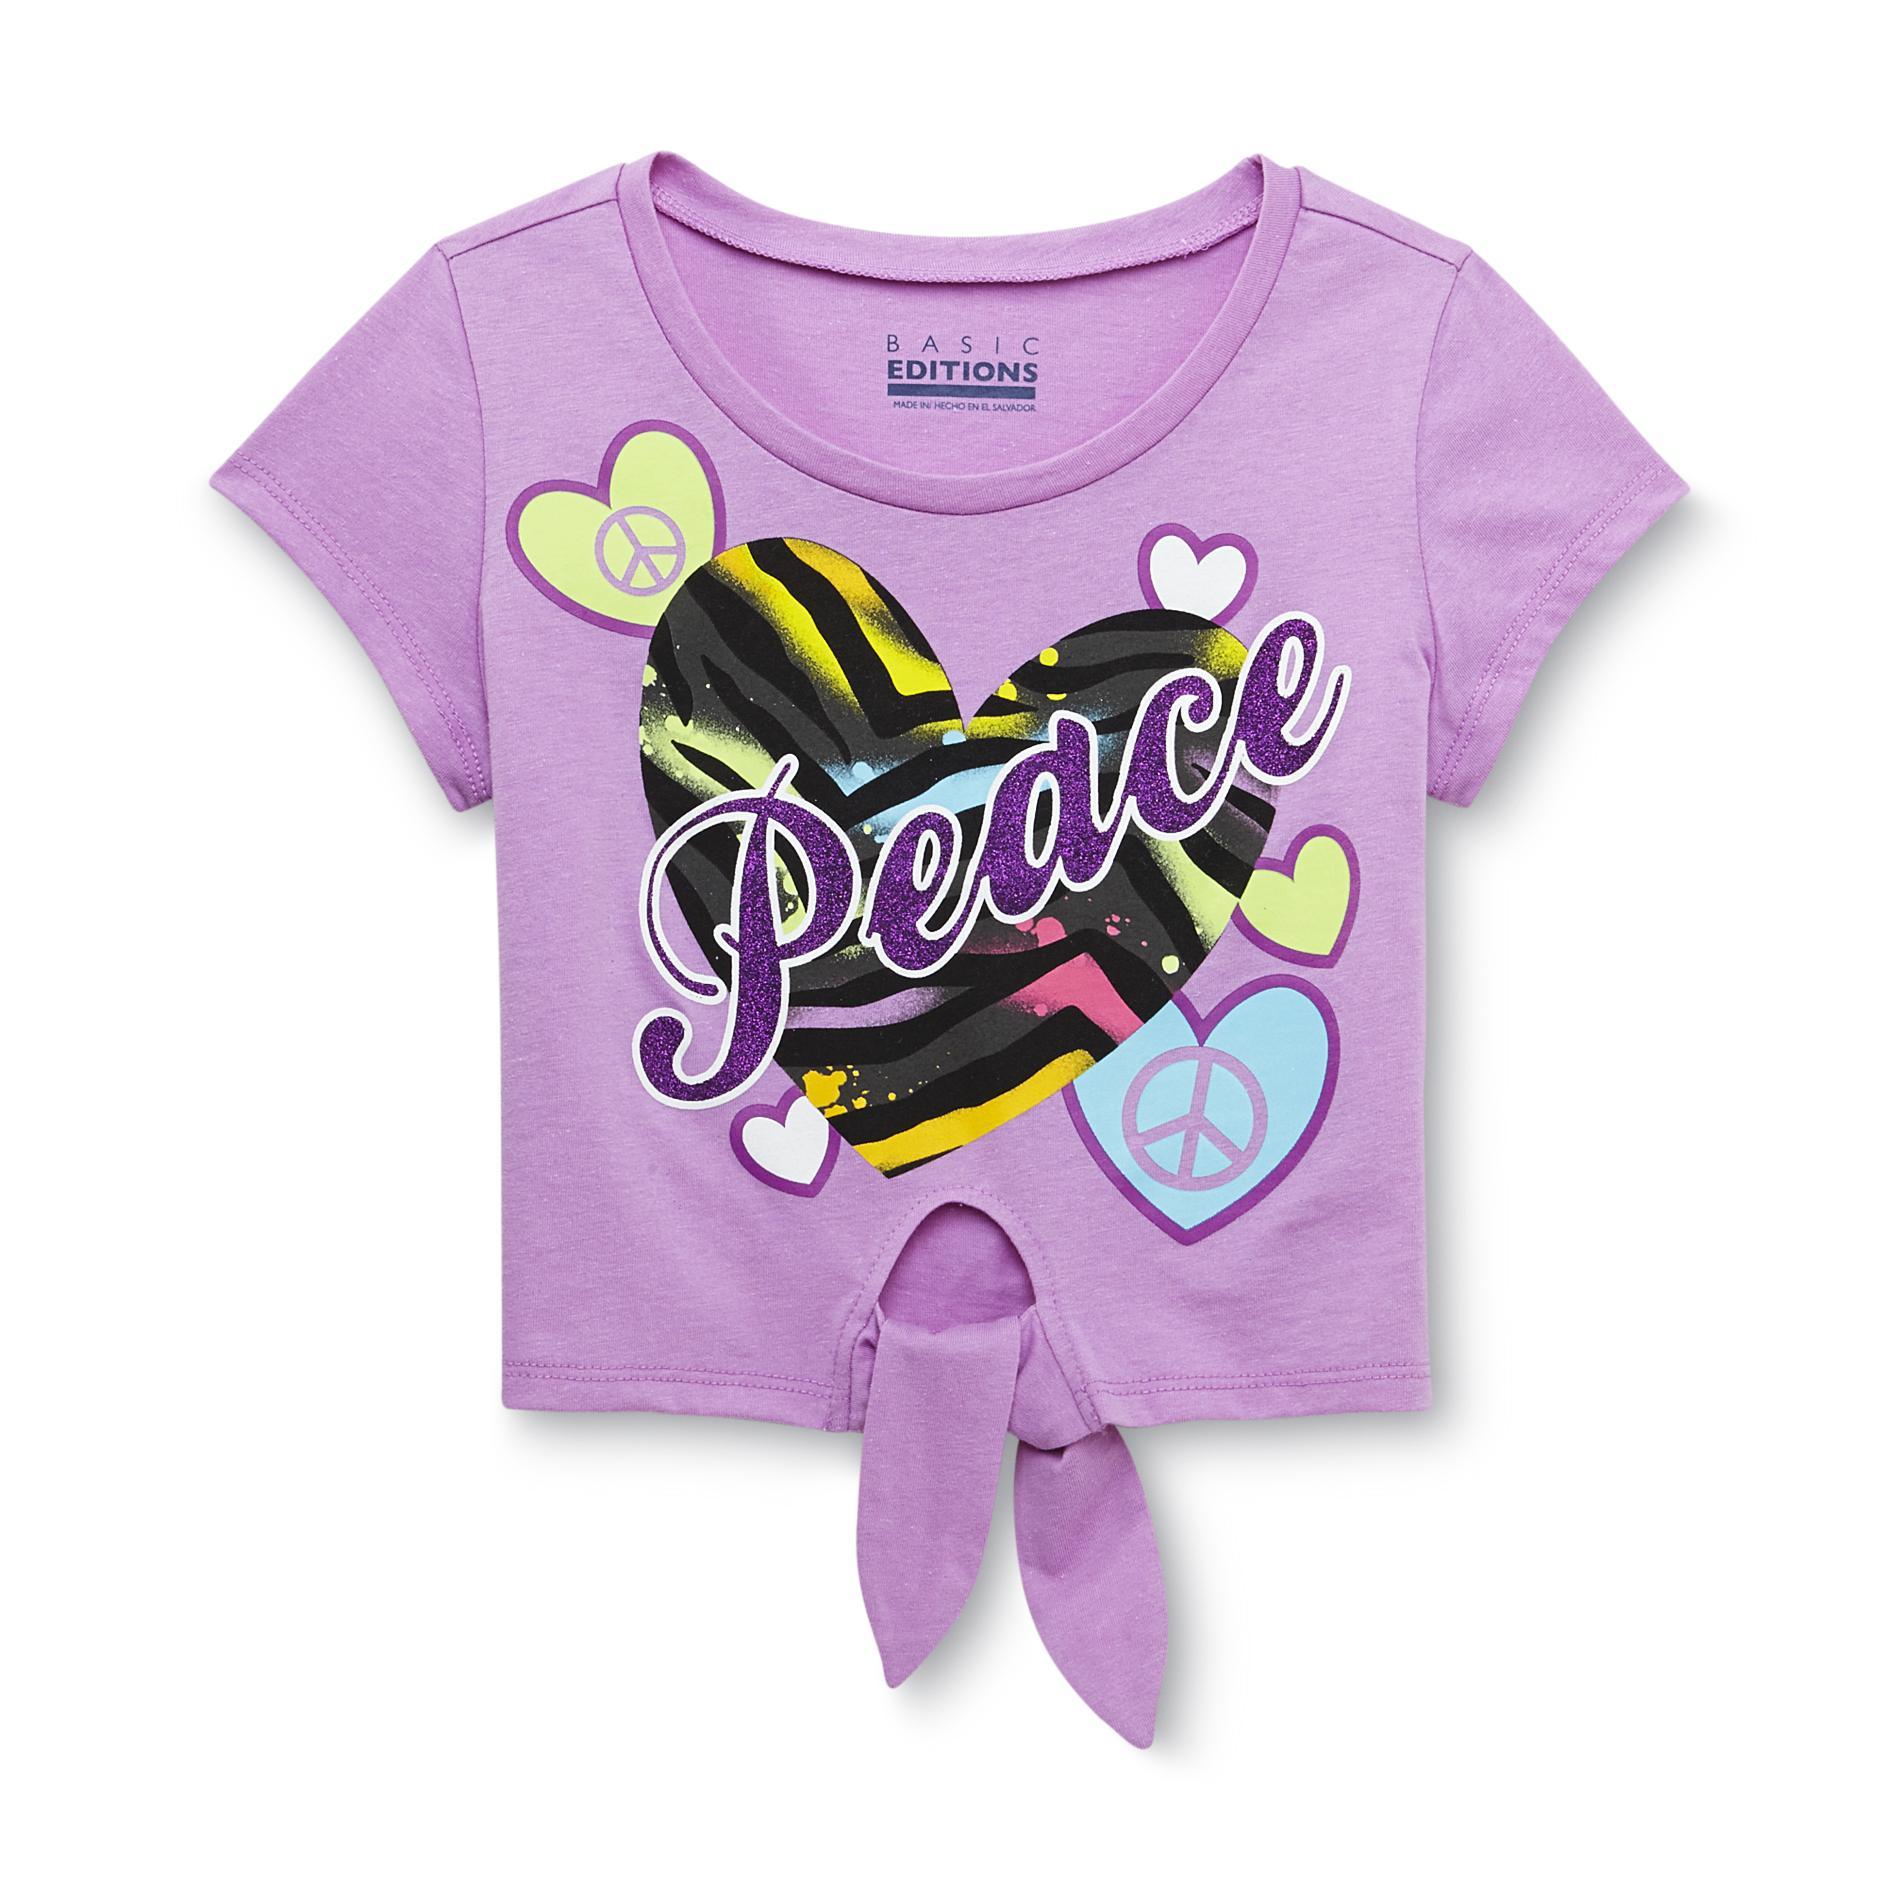 Basic Editions Girl's Front-Tie Graphic T-Shirt - Peace